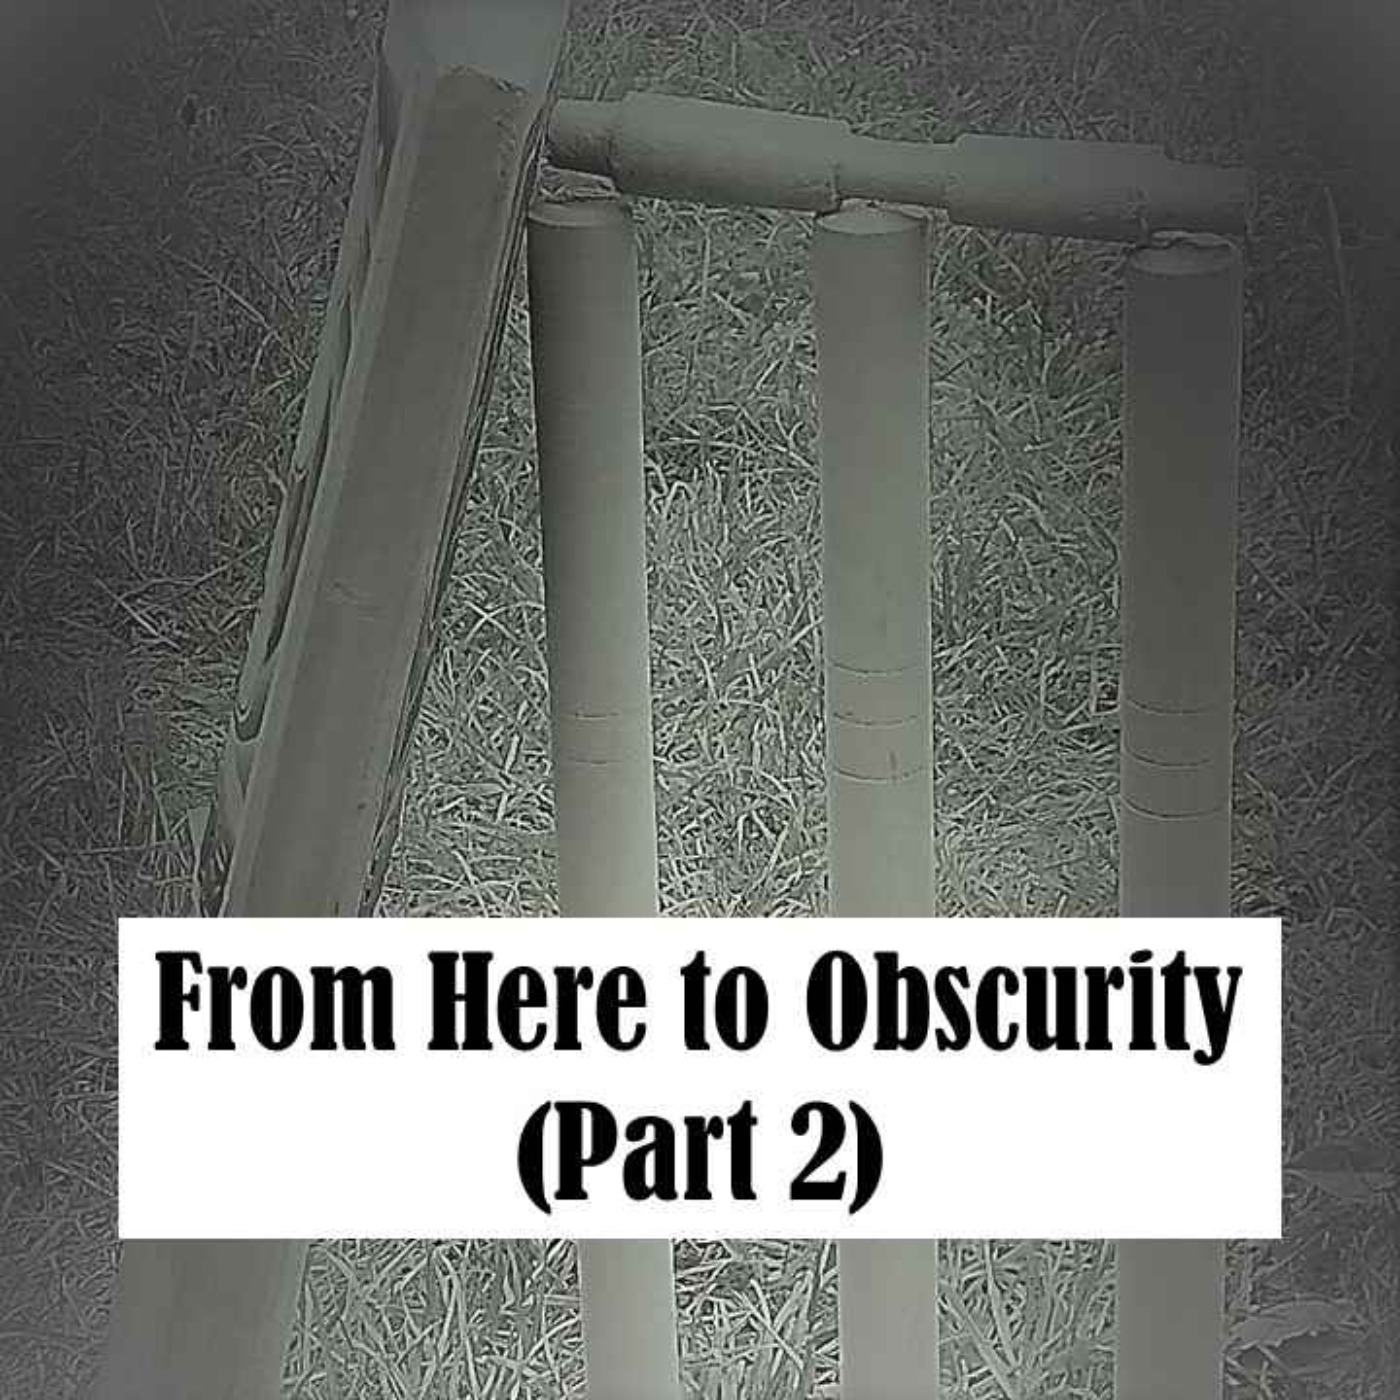 The Quiet Men of England Episode 2 (Part 2): From Here To Obscurity